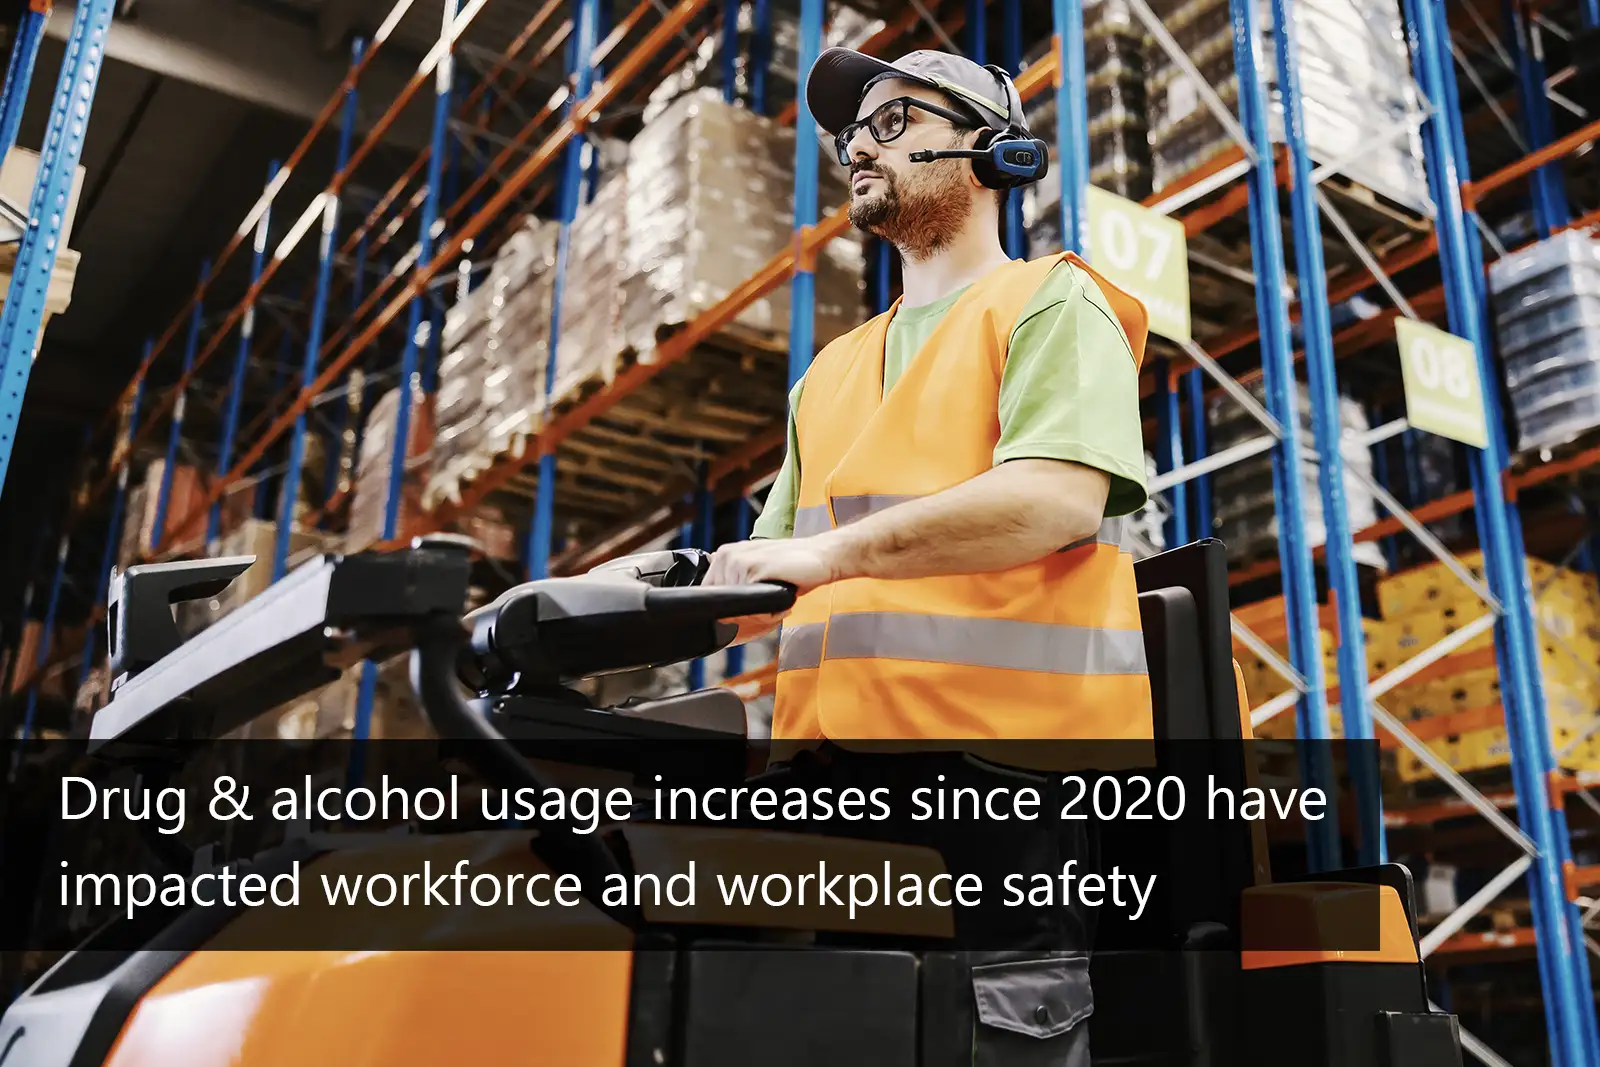 Workforce Safety in Jeopardy: Drug & Alcohol Use Surge Since 2020